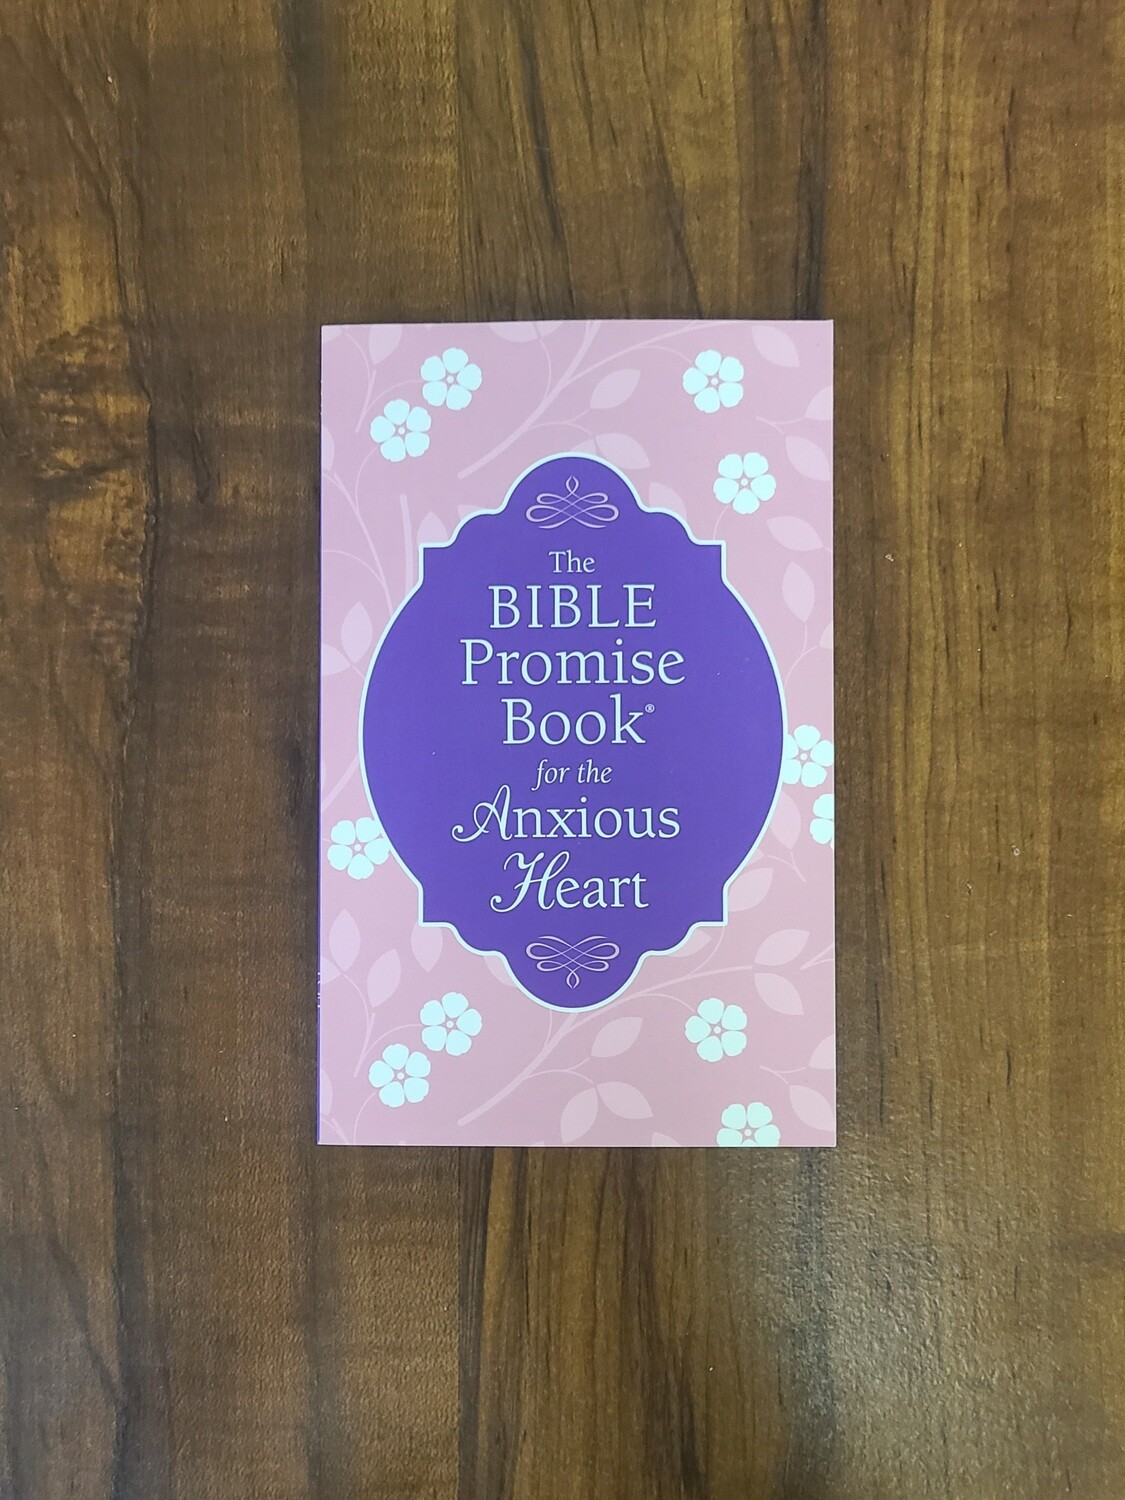 The Bible Promise Book for the Anxious Heart by Janice Thompson